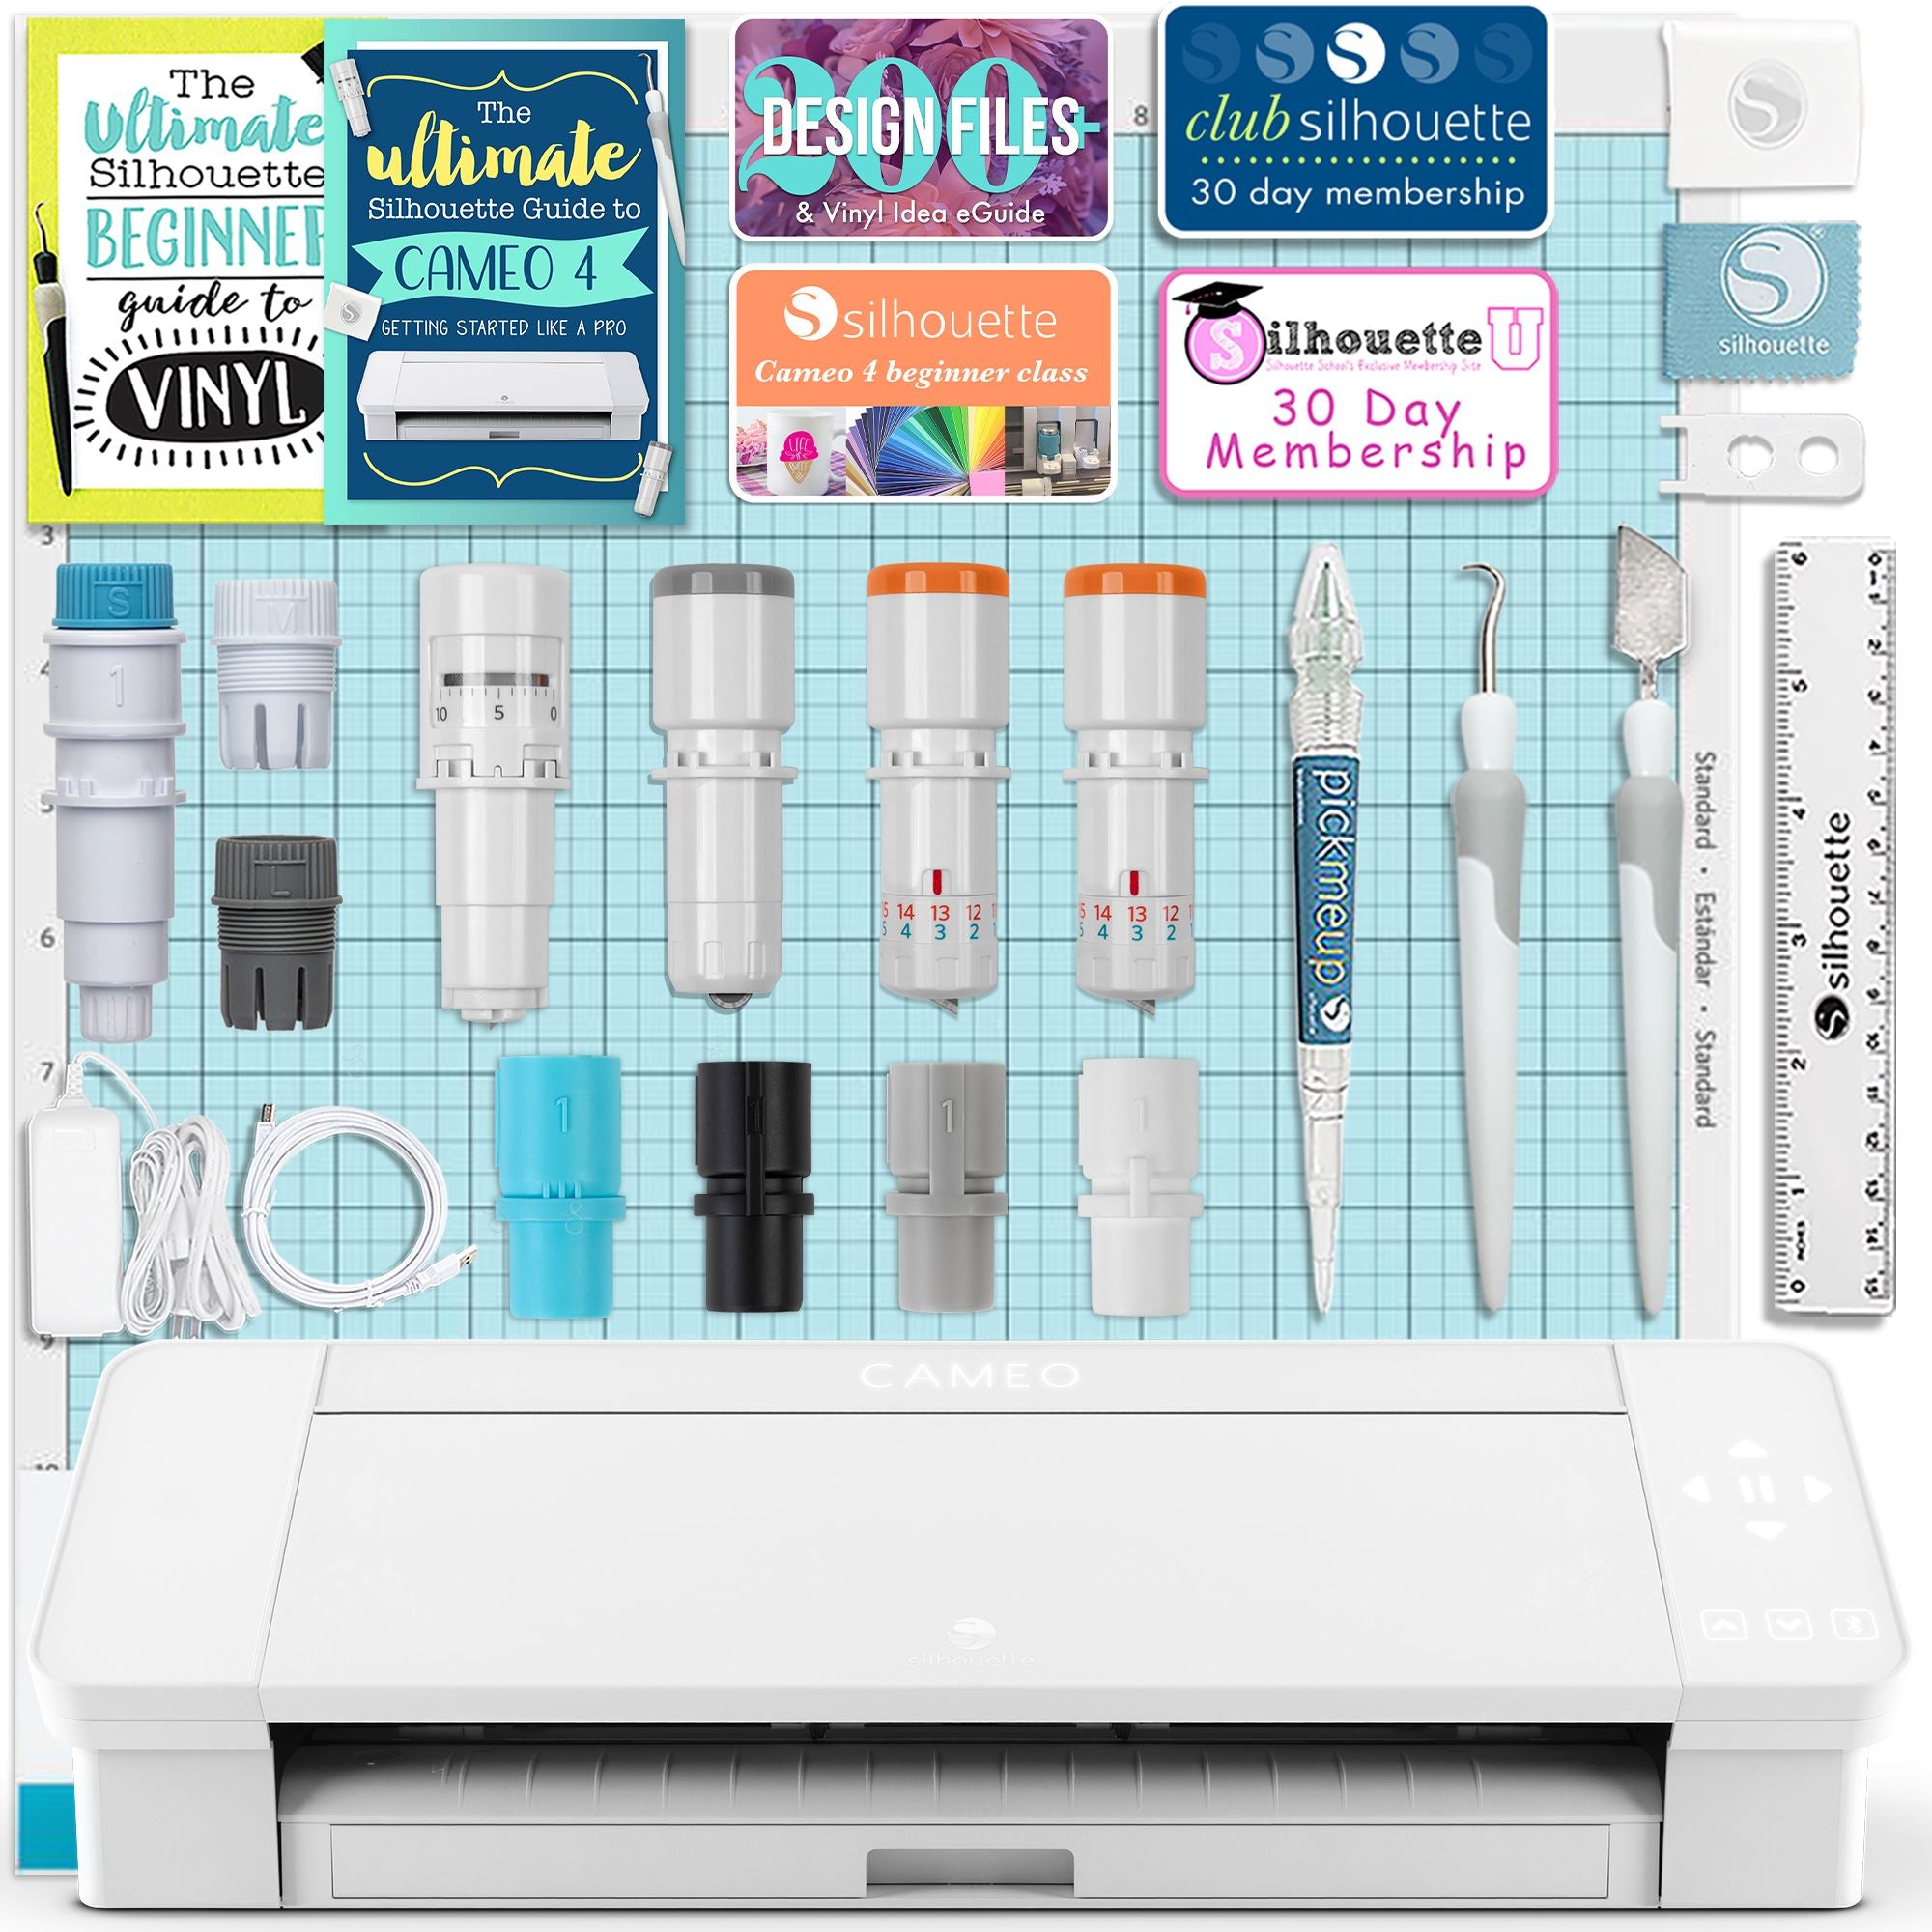 Silhouette Cameo 4 Extras Bundle with Extra AutoBlade, Extra Cutting mat,  Tool Kit, PixScan Mat, and Start up Guide for Cameo 4 with Bonus Designs